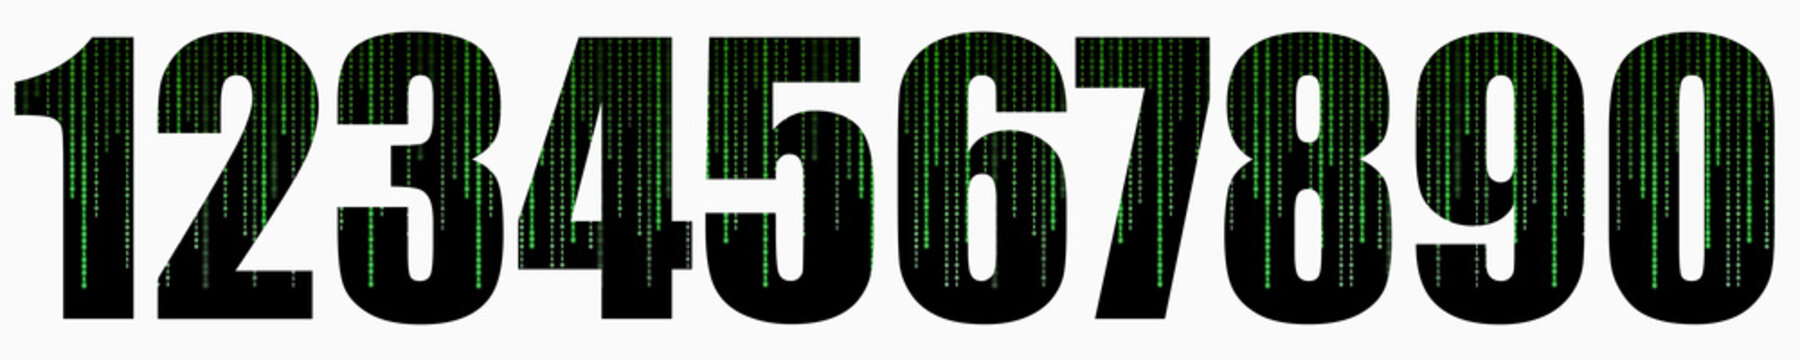 A set of numbers 1 2 3 4 5 6 7 8 9 0 with matrix binary digital code isolated on a white background. AI set of numbers